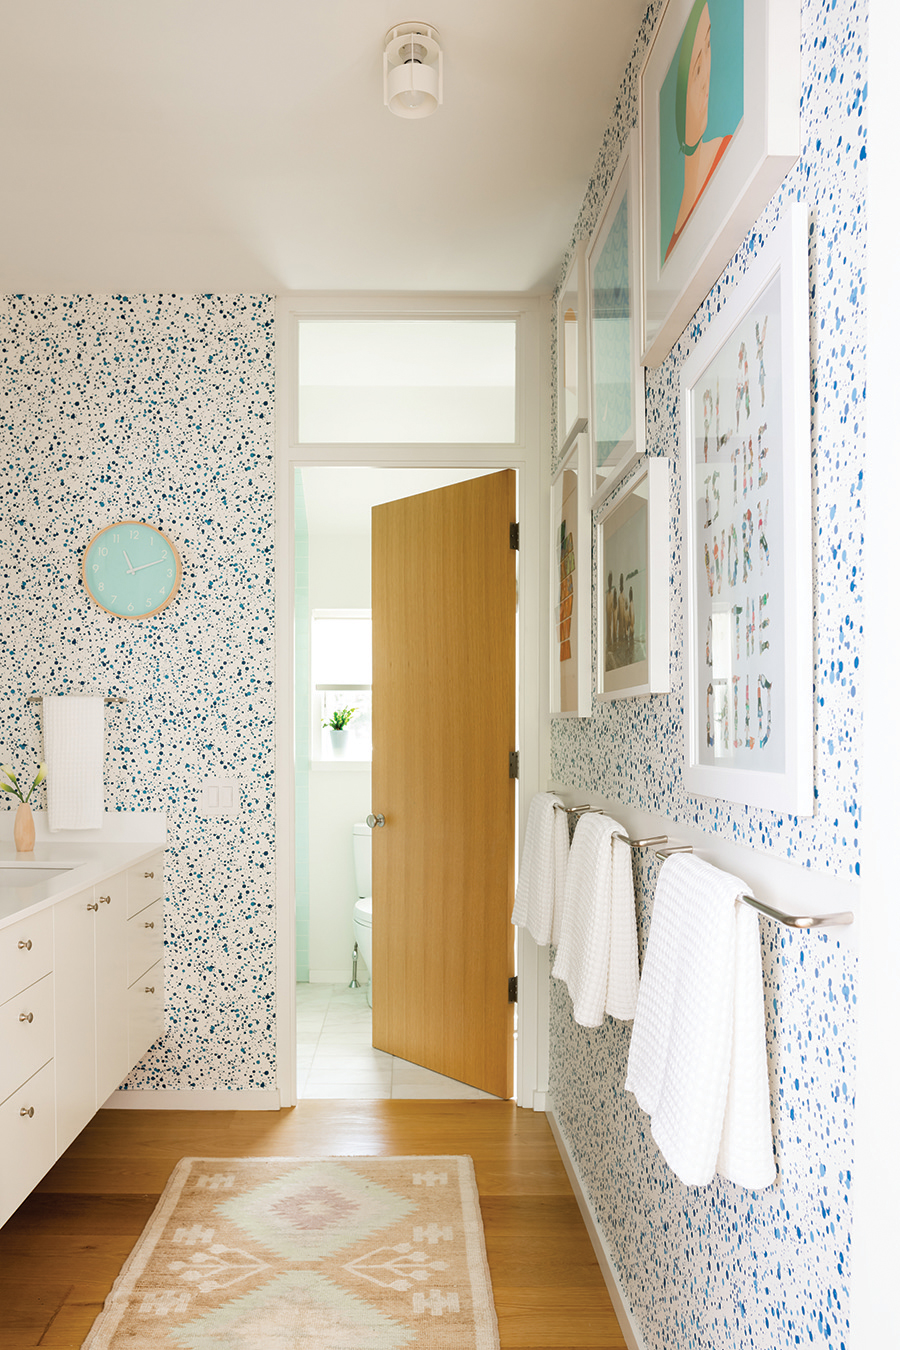 A transom window above the door to the shower and toilet lets light into the washroom area. The wallpaper is by Hinson.